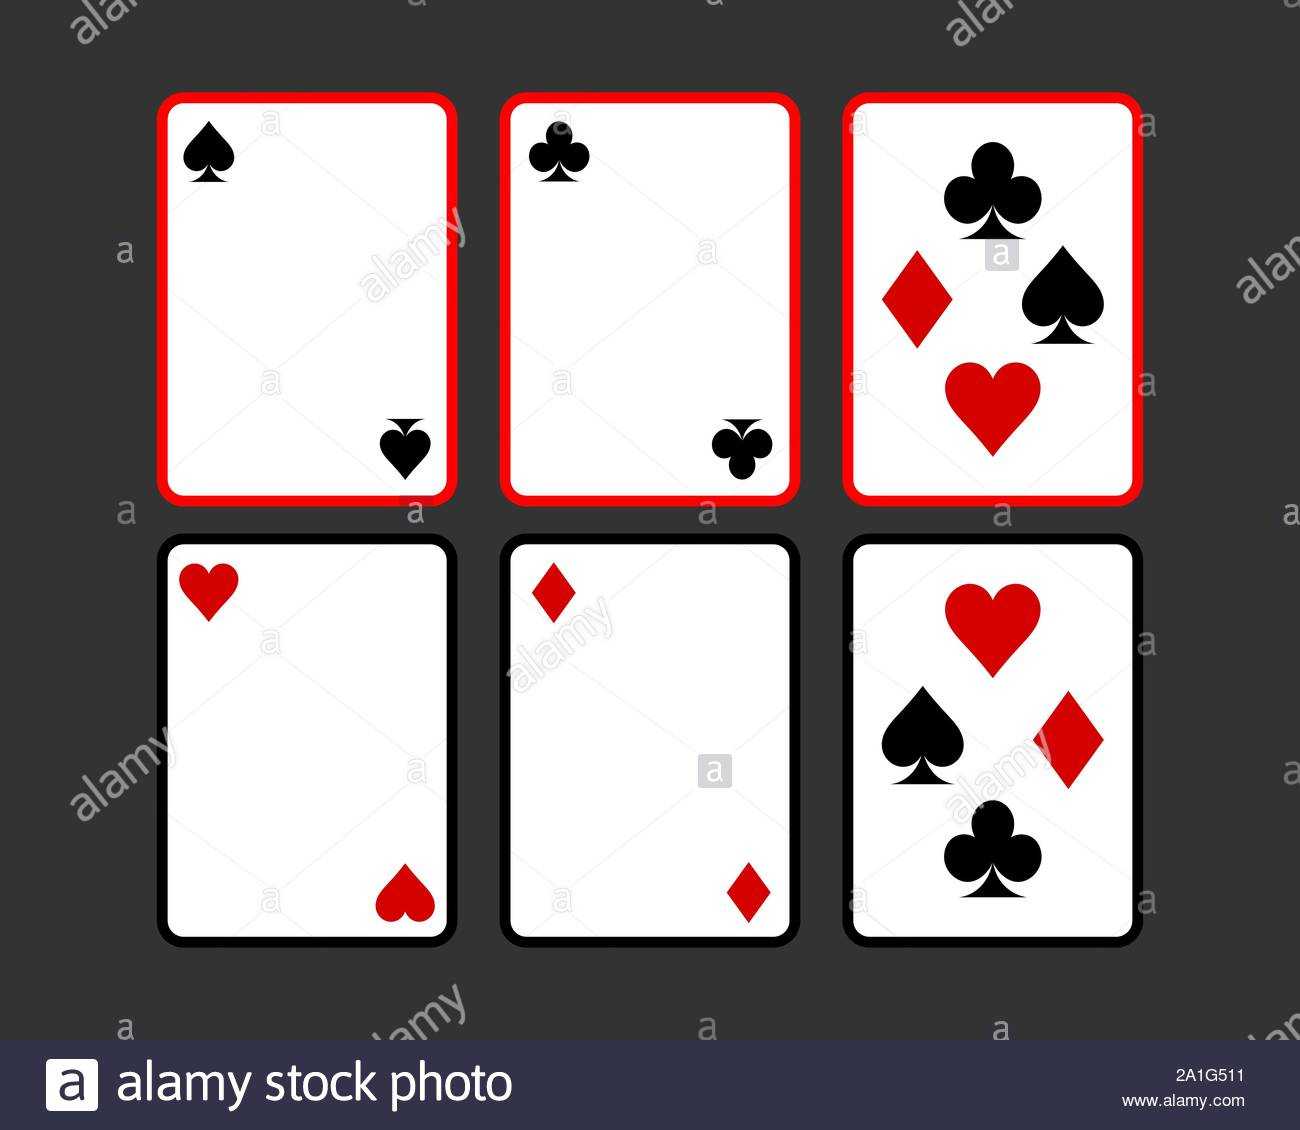 Playing Cards Vector Illustration. Poker Playing Cards Throughout Template For Game Cards